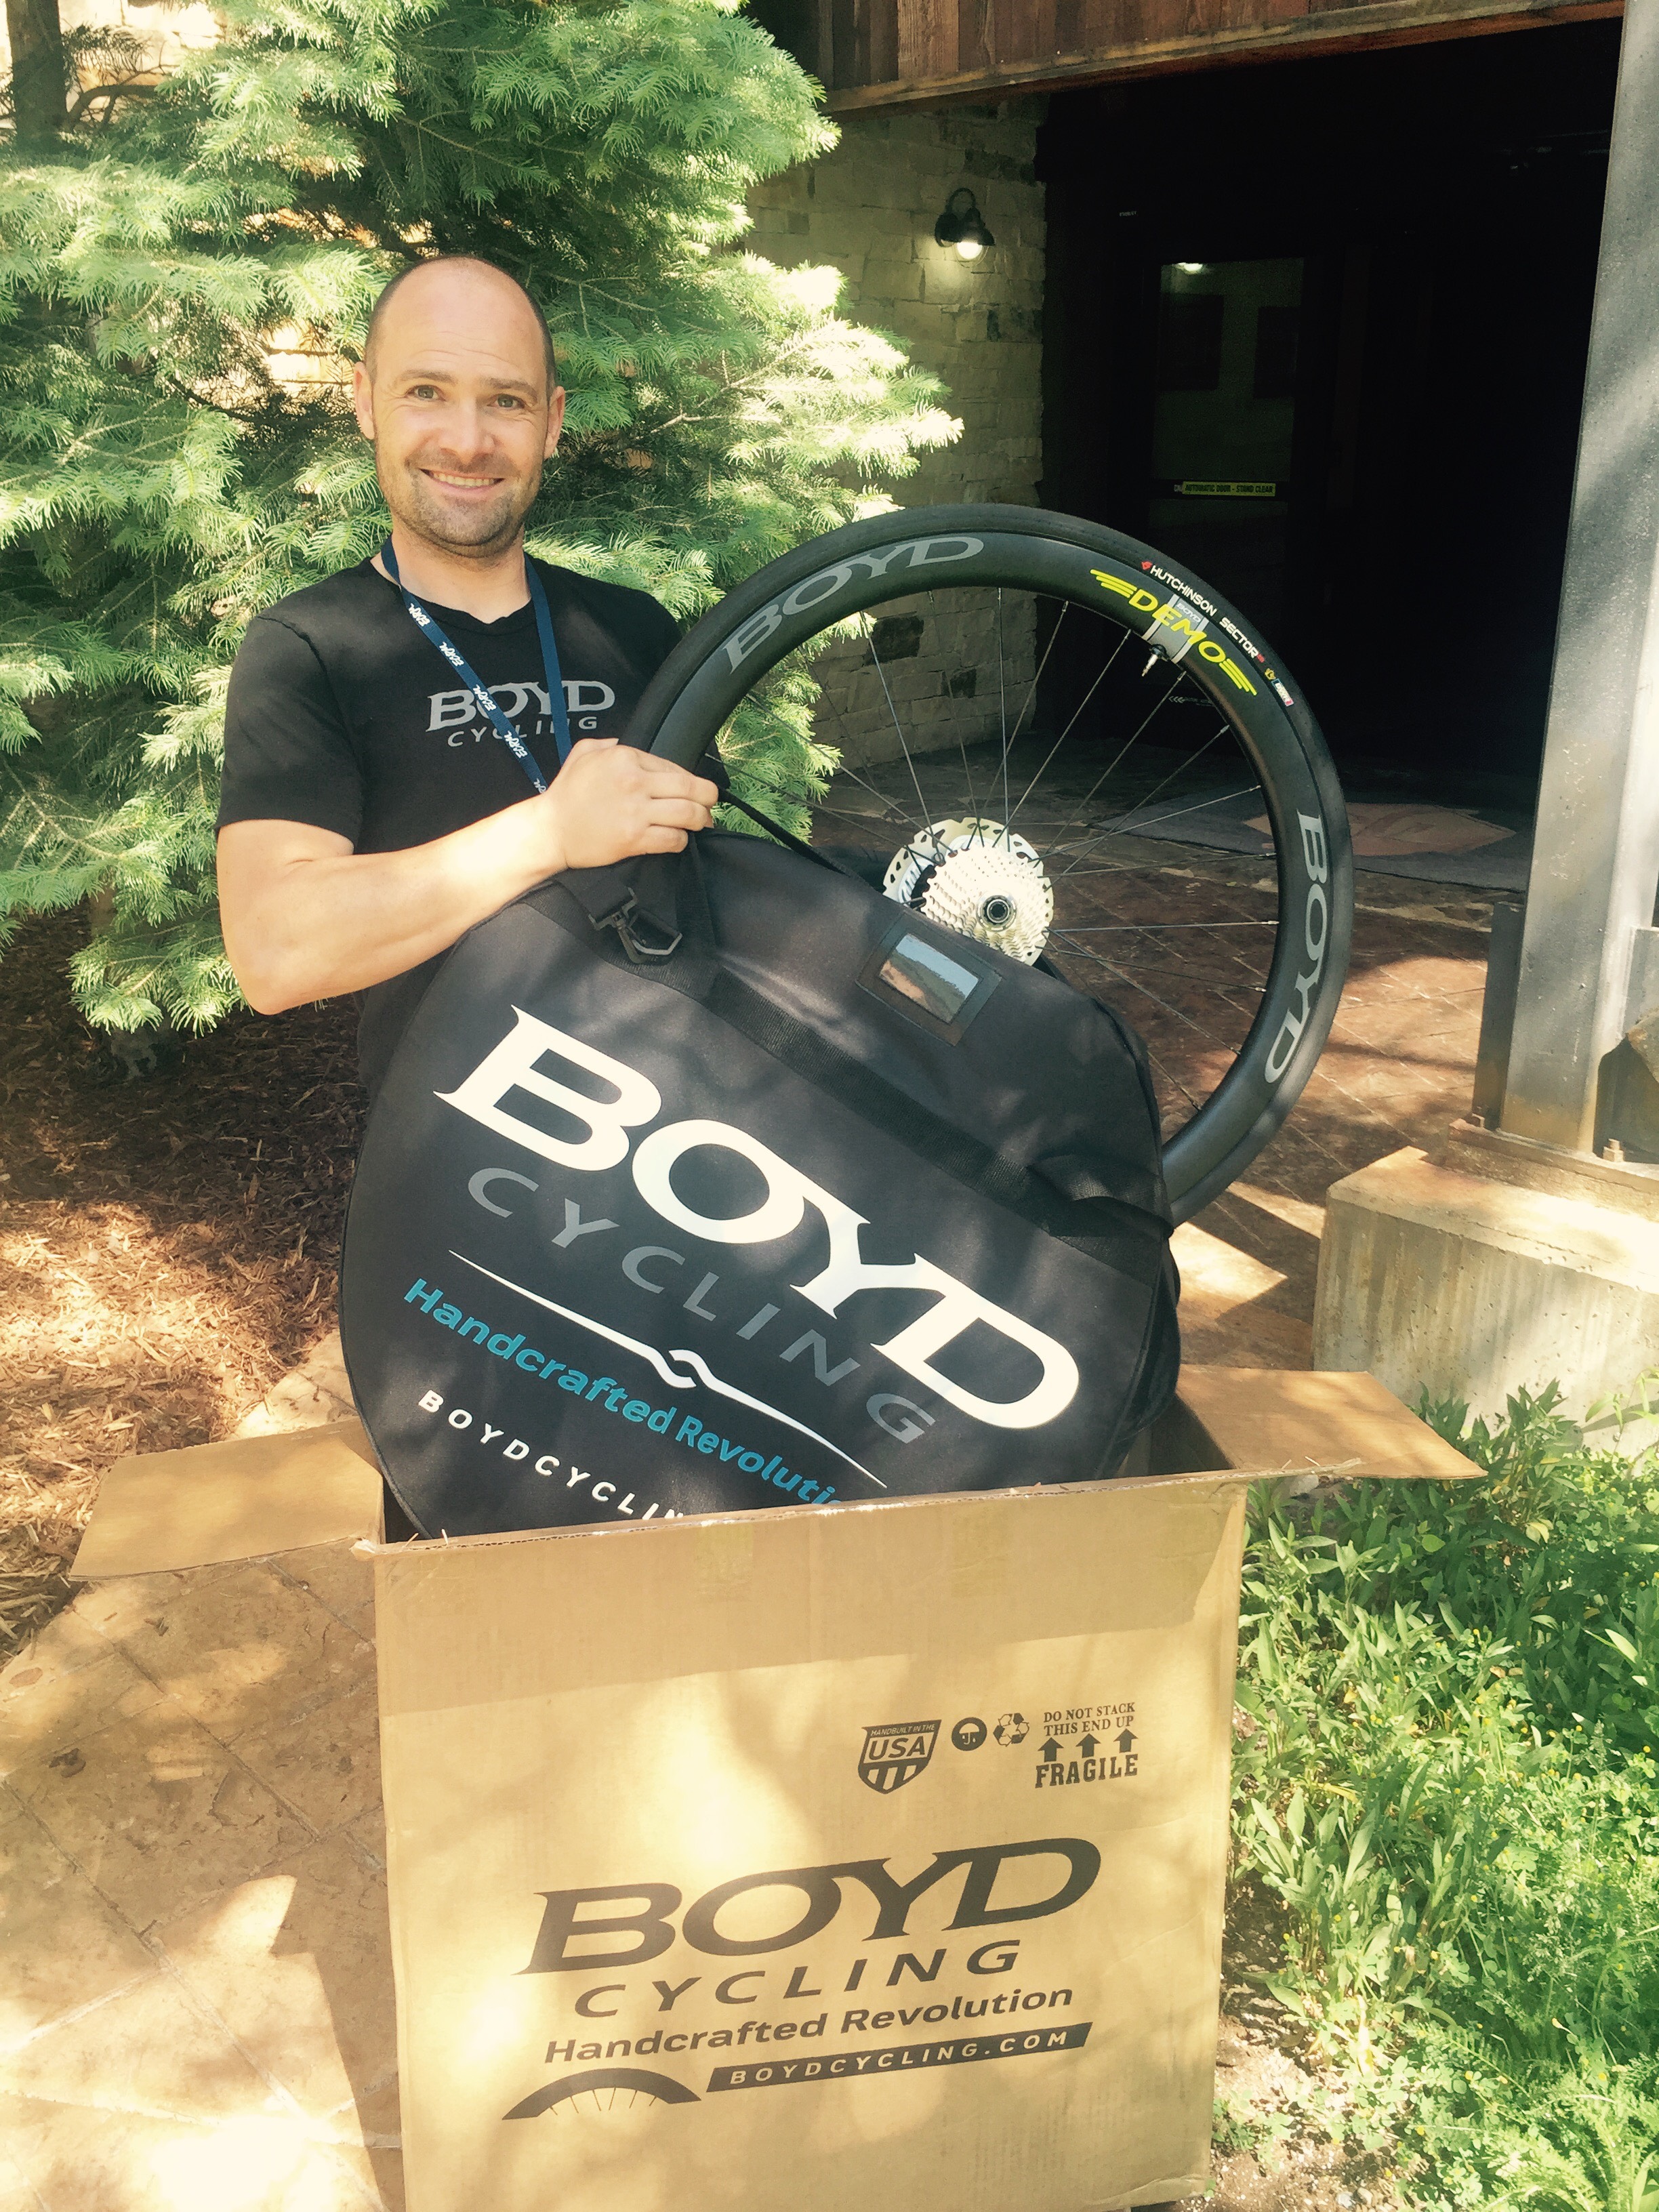 Boyd Johnson of South Carolina wheel maker Boyd Cycling is preparing to roll out a new Ready to Ride program, where both dealers and consumers can order complete sets of wheels with tires, tubes or tubeless setup, cassette and disc brake rotors already installed and, well … ready to ride. Rollout is targeted for Aug. 1. Wheels will ship in a double wheel bag. Tire options will include Schwalbe for road, Hutchinson for cyclocross, and Maxxis for mountain. 